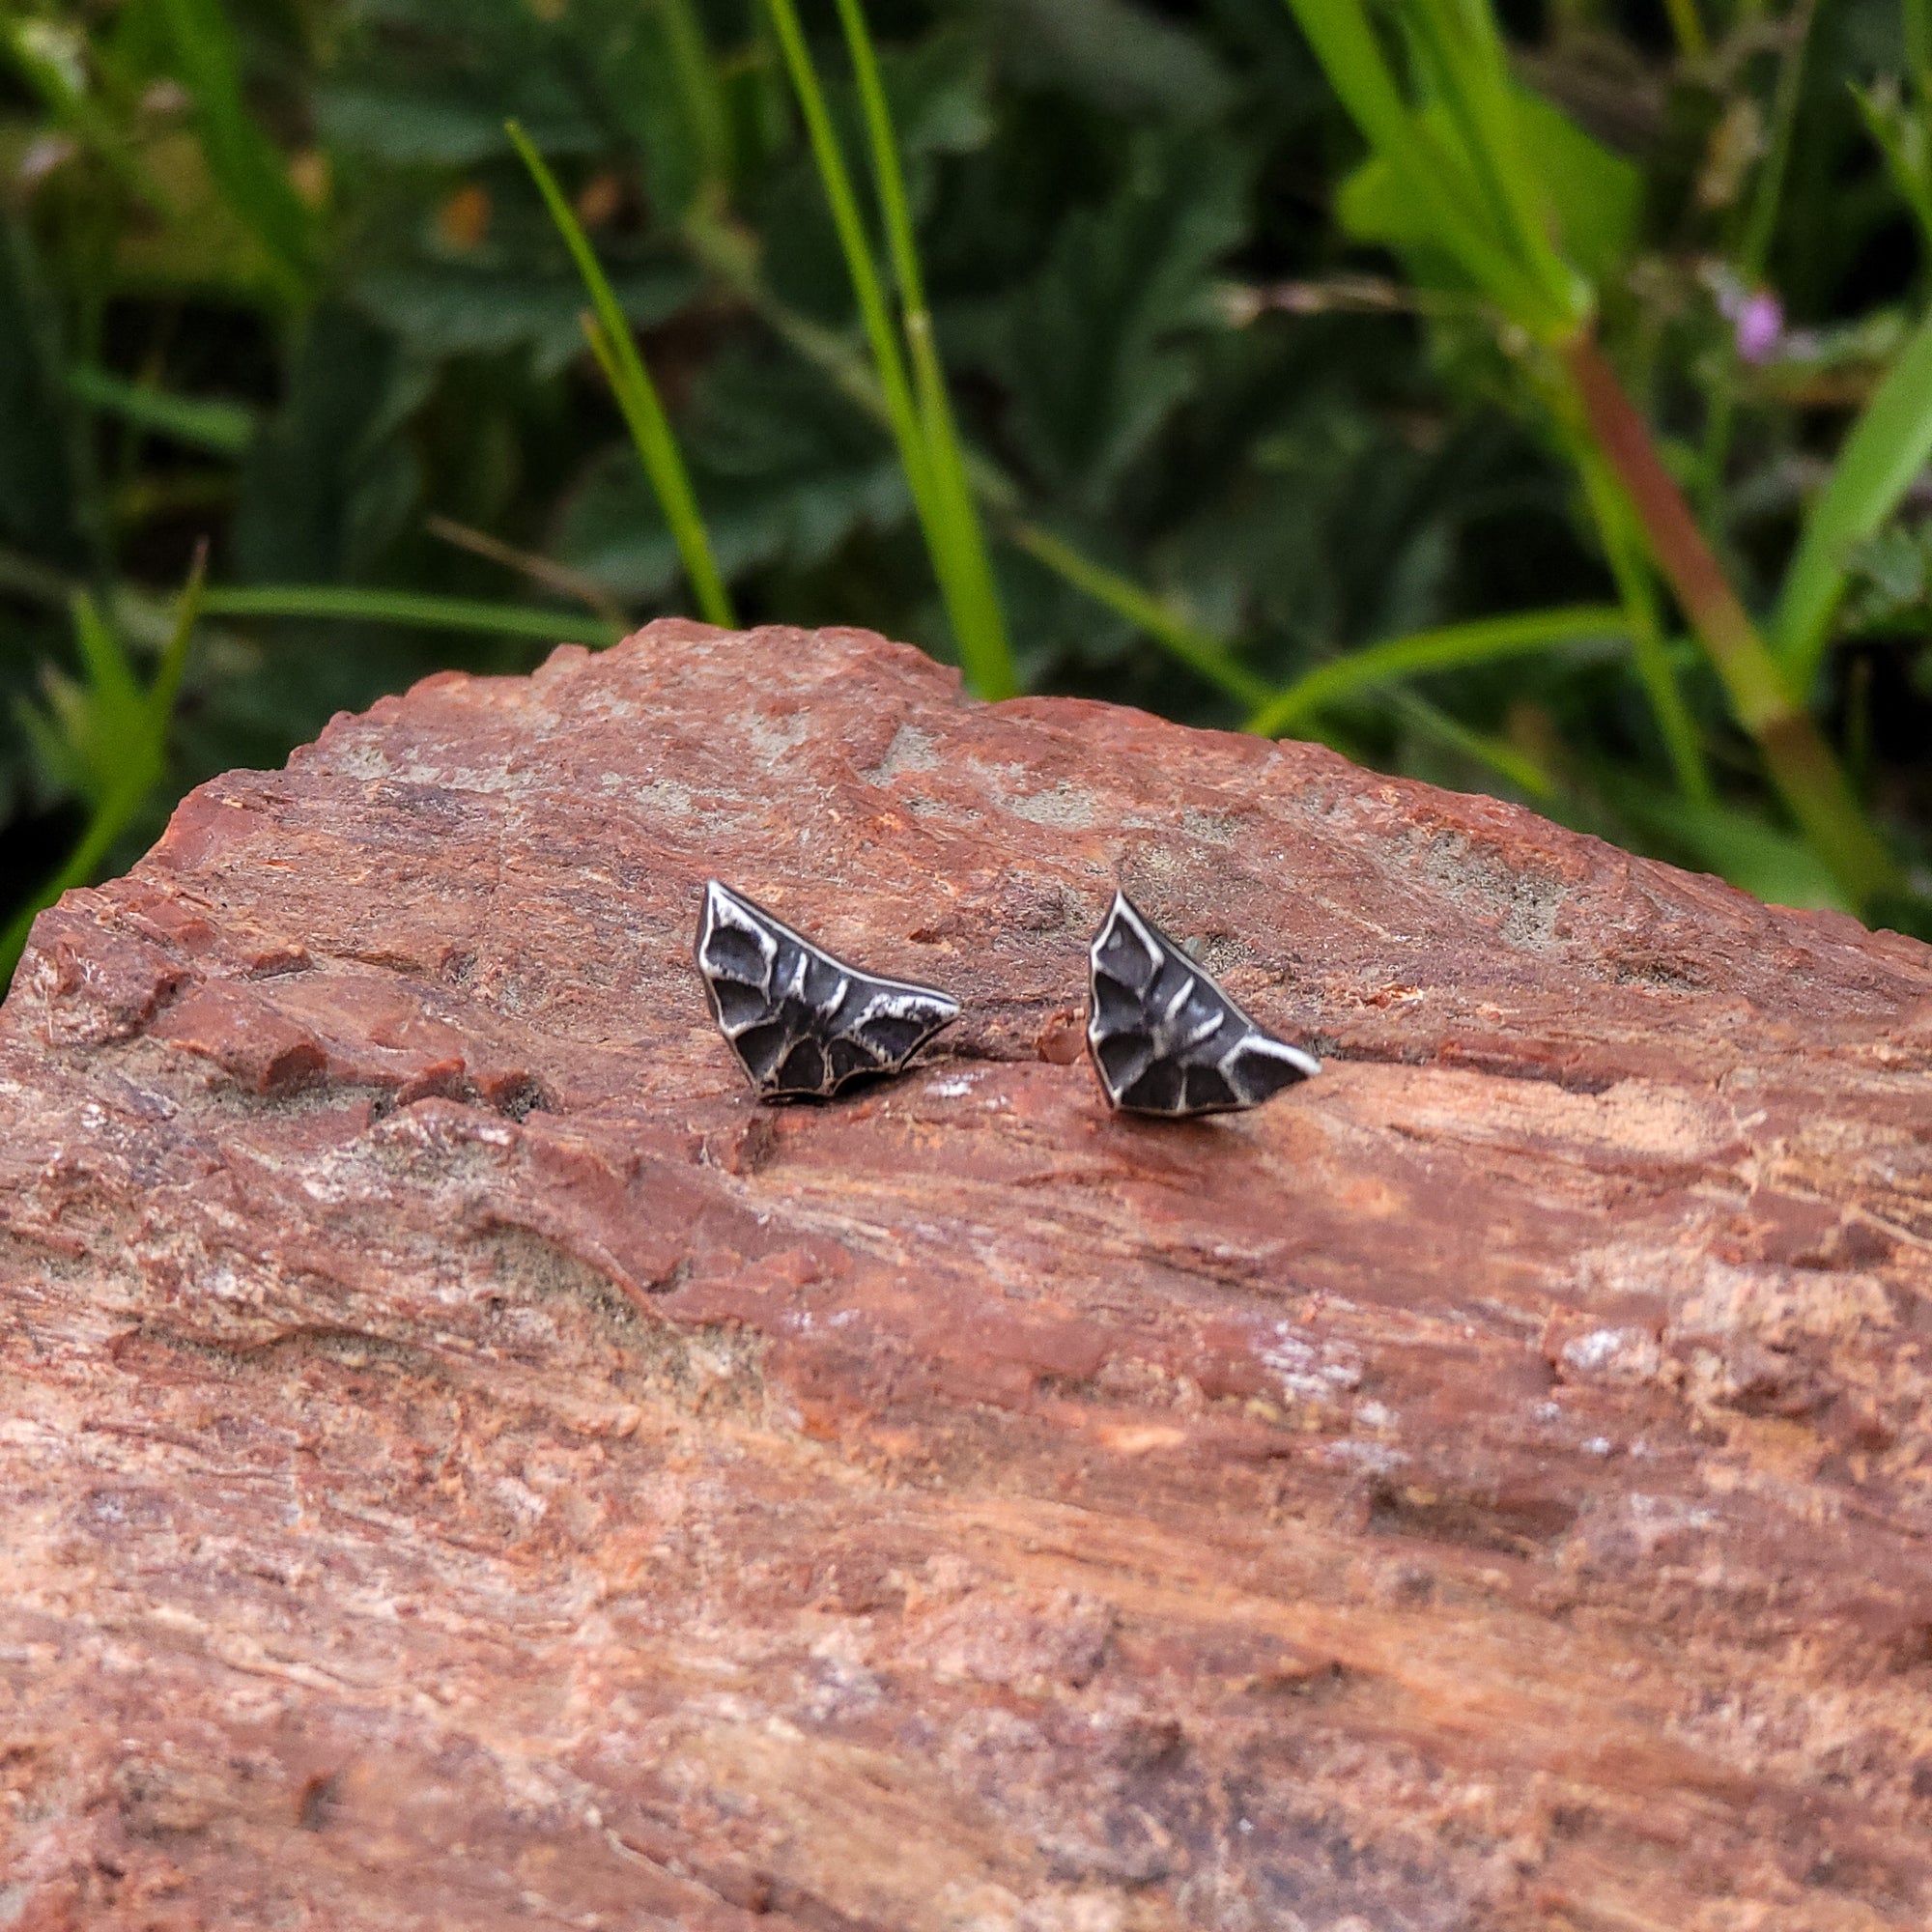 These sterling silver bat shaped stud earrings are depicted in mid-flight, with their wings extended in a graceful arc. In the photograph, the earrings are resting on a piece of wood, surrounded by lush green leaves.